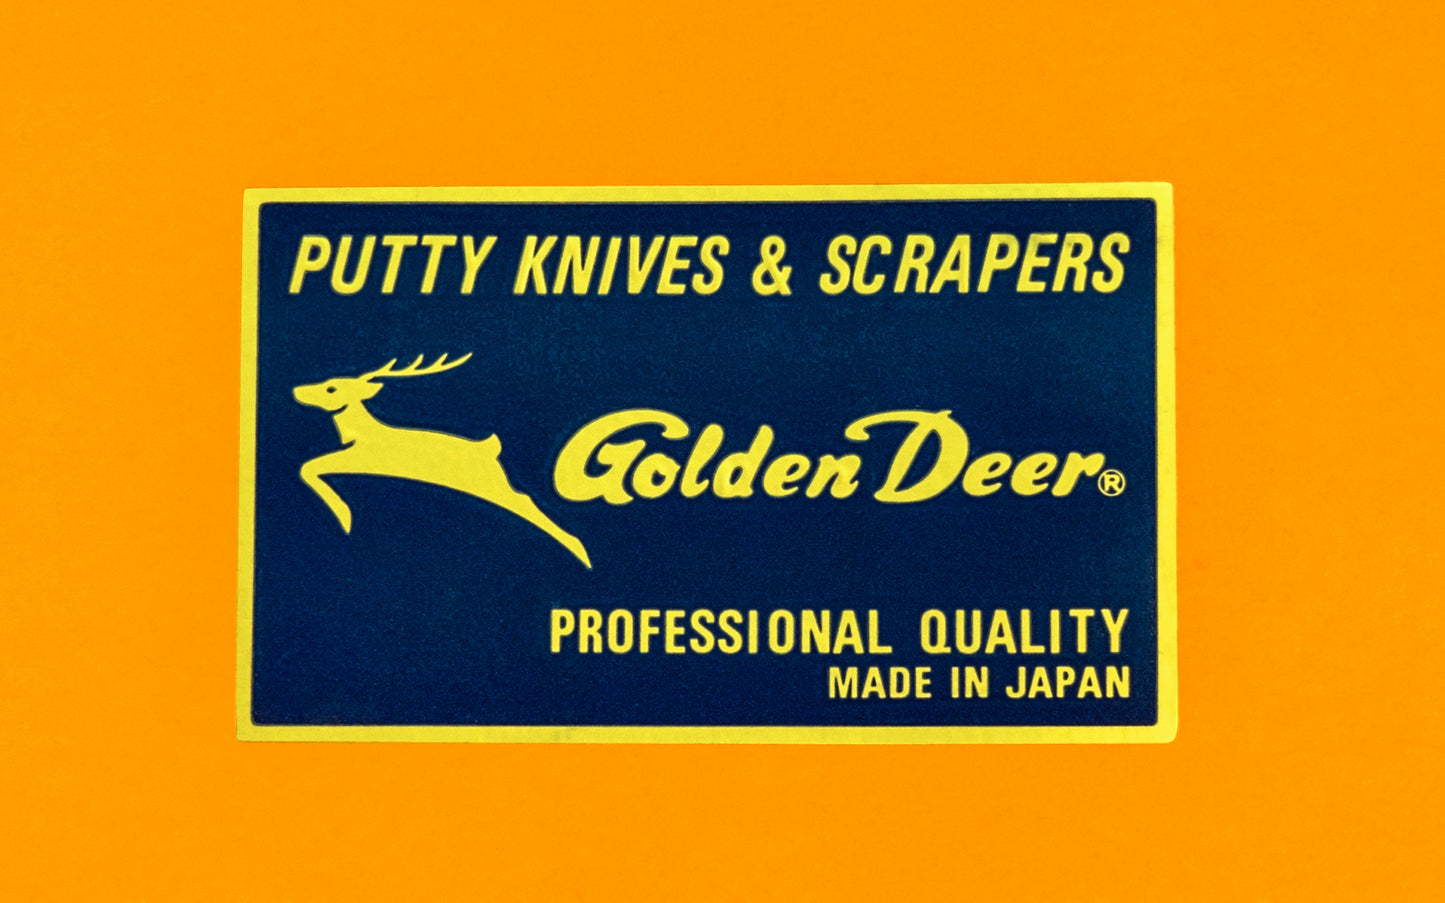 This Japanese 1-1/2" wide putty knife is a stiff putty knife made by "Golden Deer". Made of high carbon steel with heavy duty nylon handle.  Made in Japan. Golden Deer Brand.  Thick Stiff Putty Knife Blade. Japanese putty knife. Stiff Blade